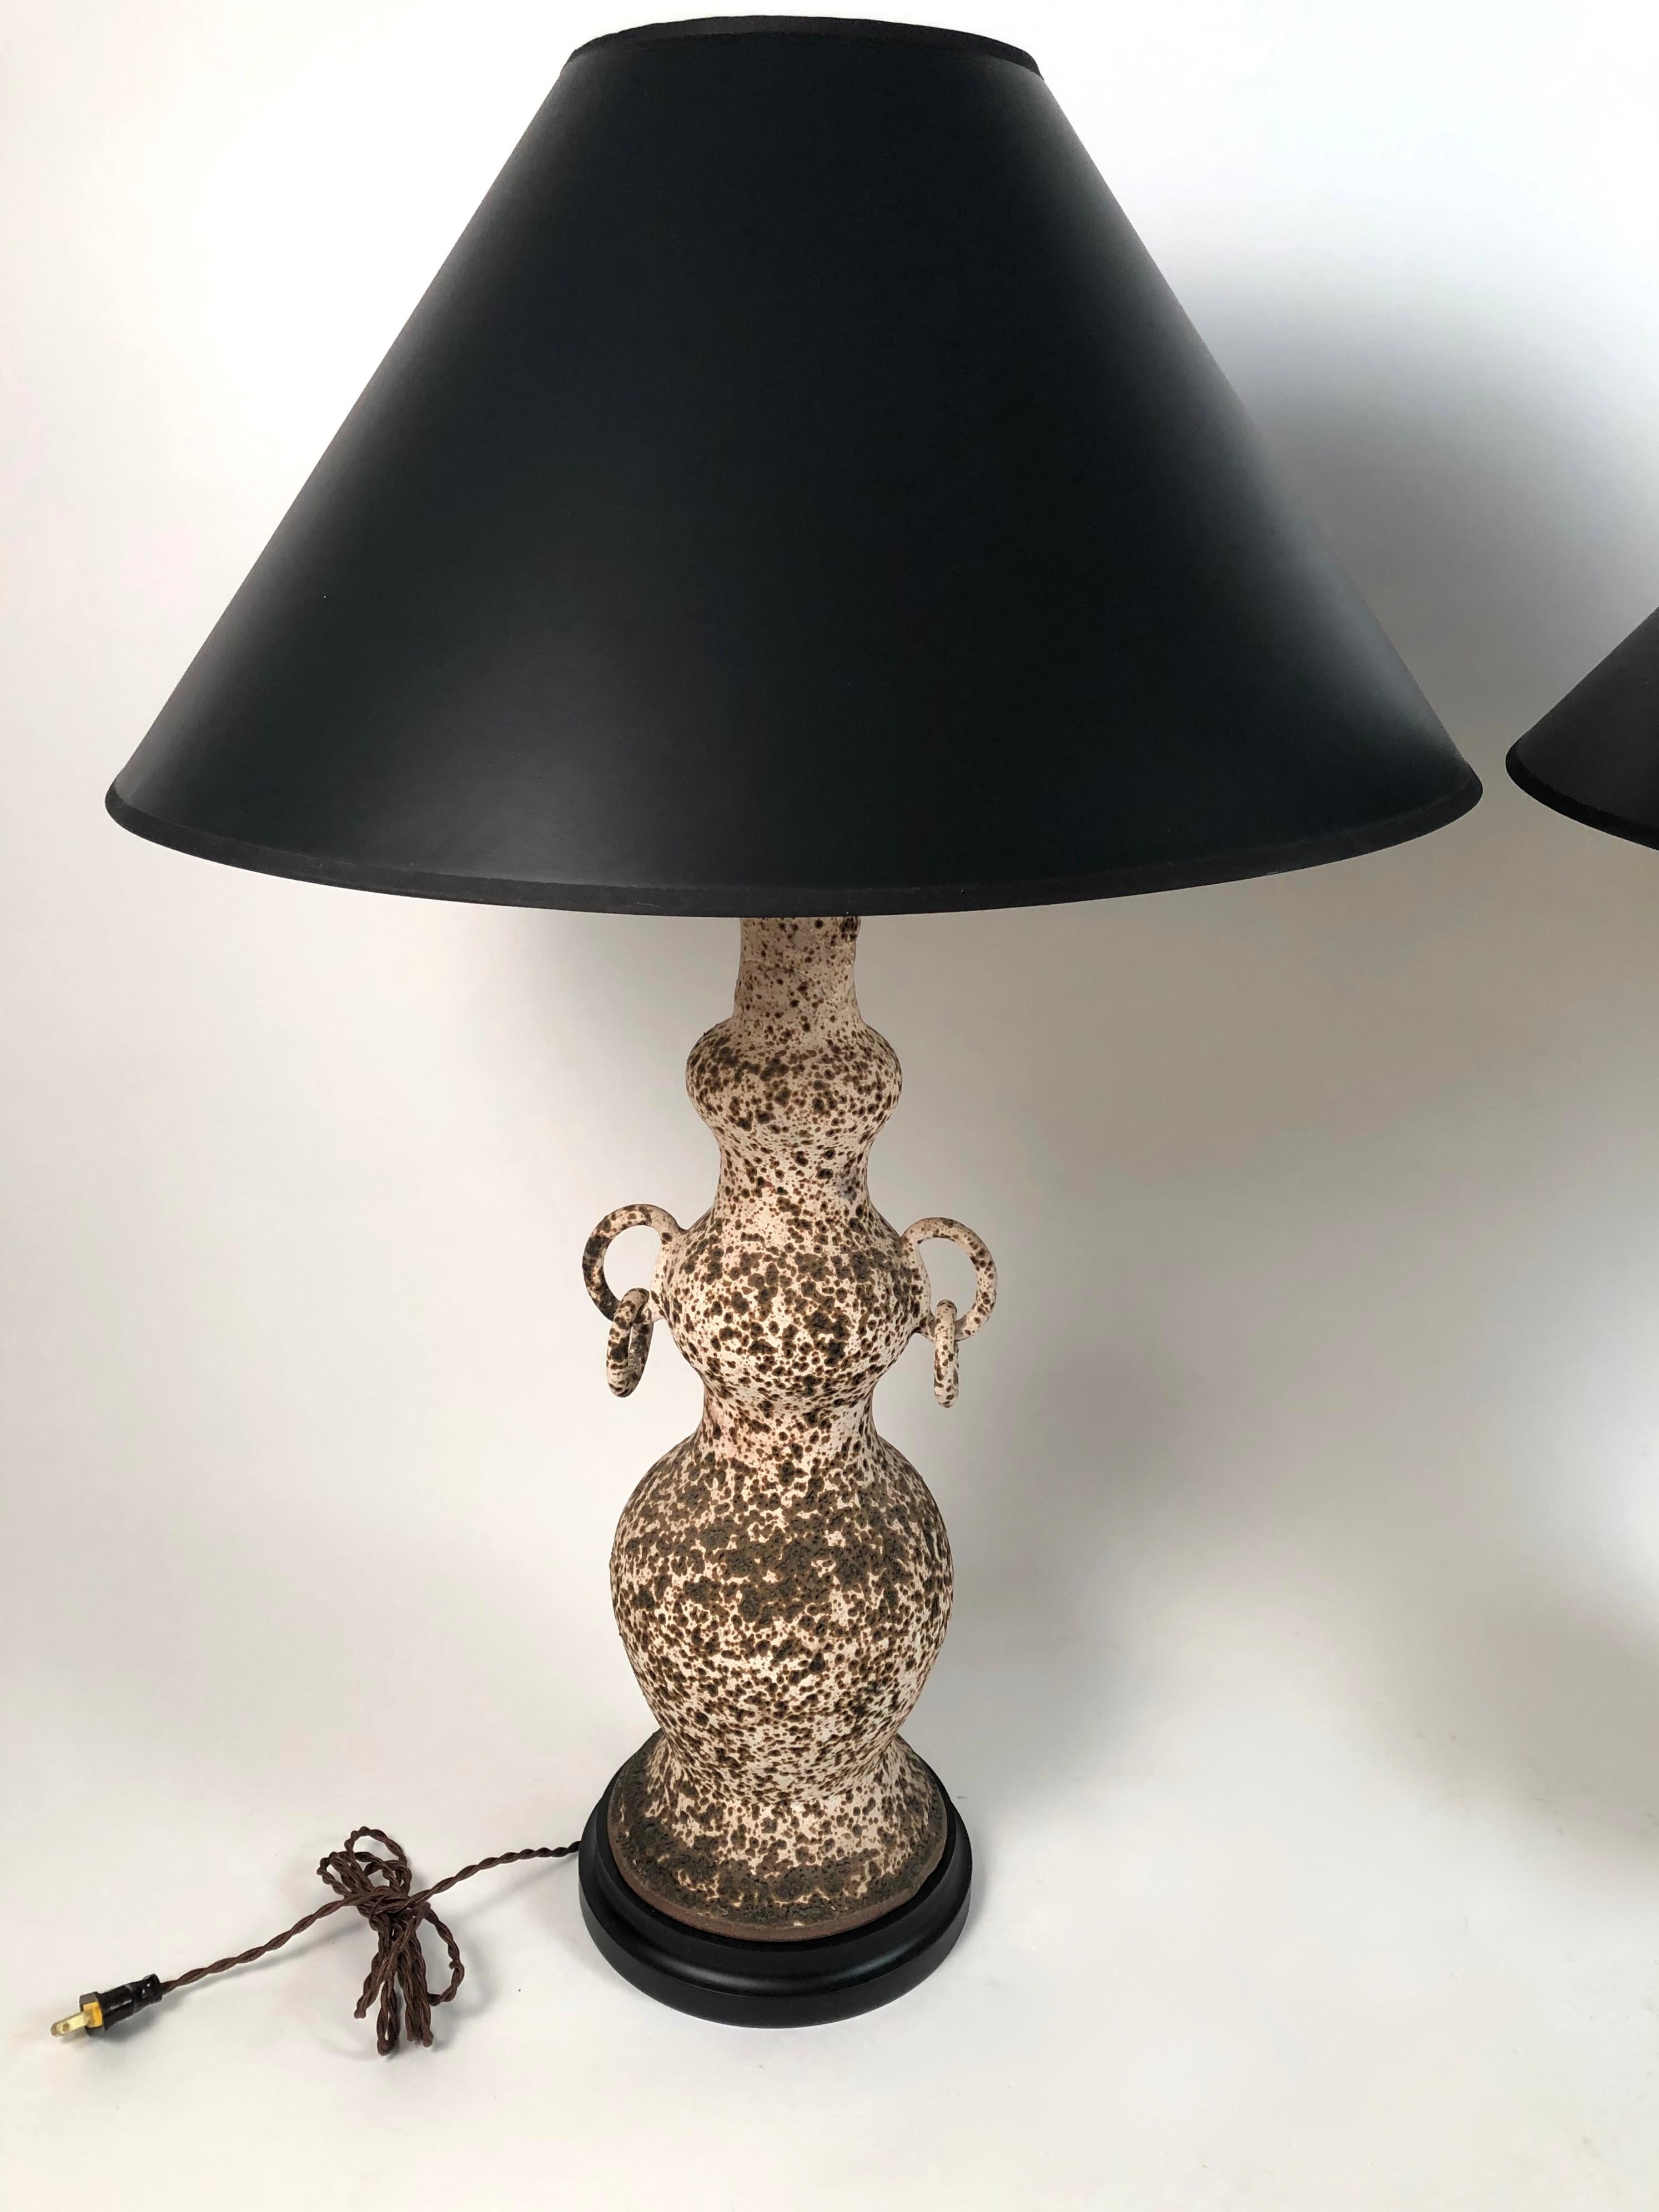 An unusual and stylish pair of Italian art pottery lamps, in the manner of Guido Gambone, each of triple gourd form with rings, mounted on black painted bases, with new wiring and electrical fittings. Shades available, if desired.